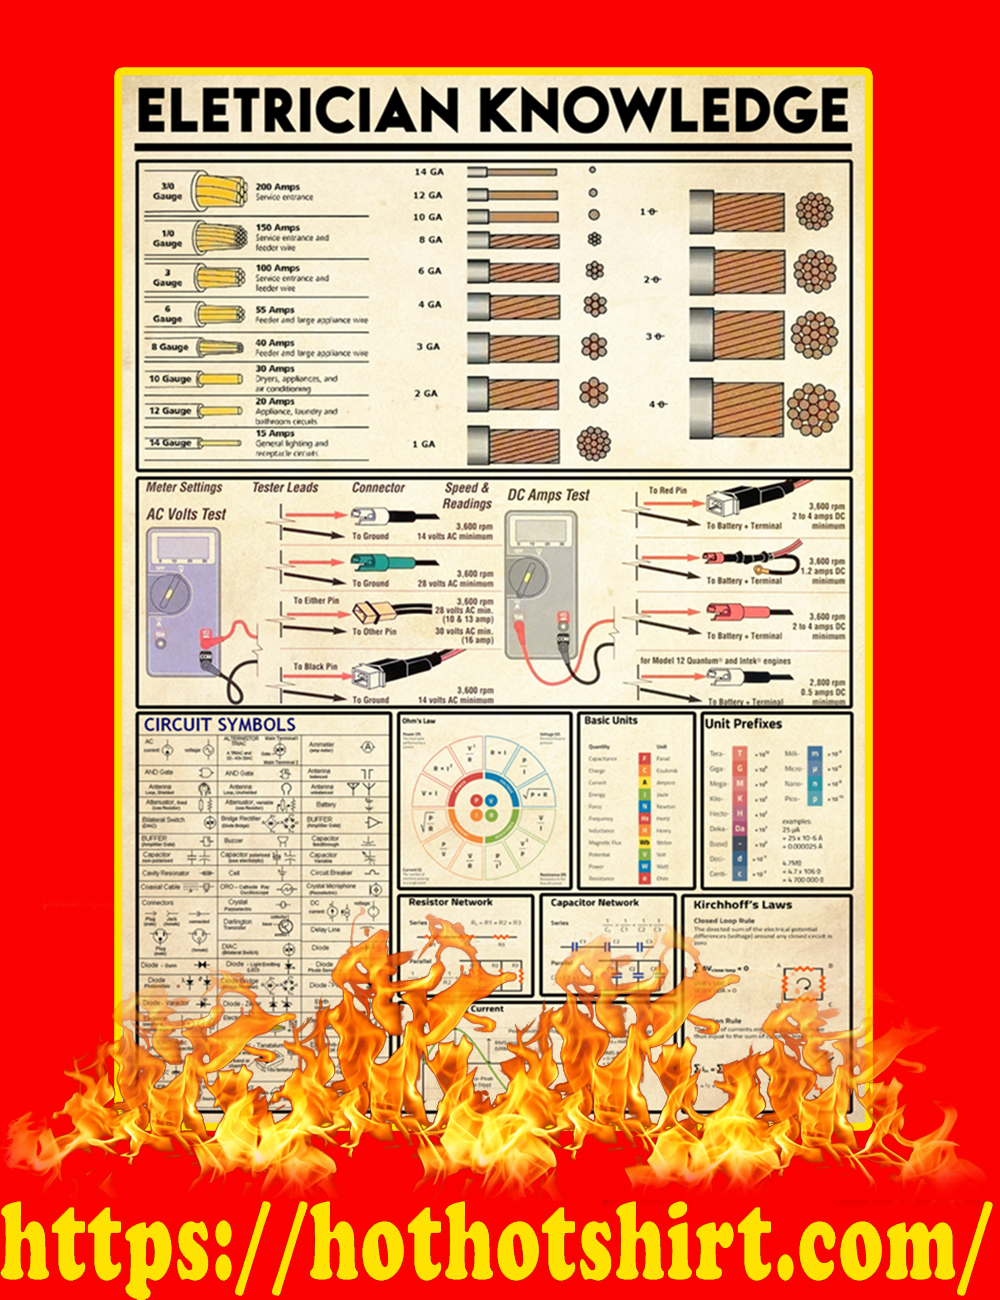 Eletrician Knowledge Poster